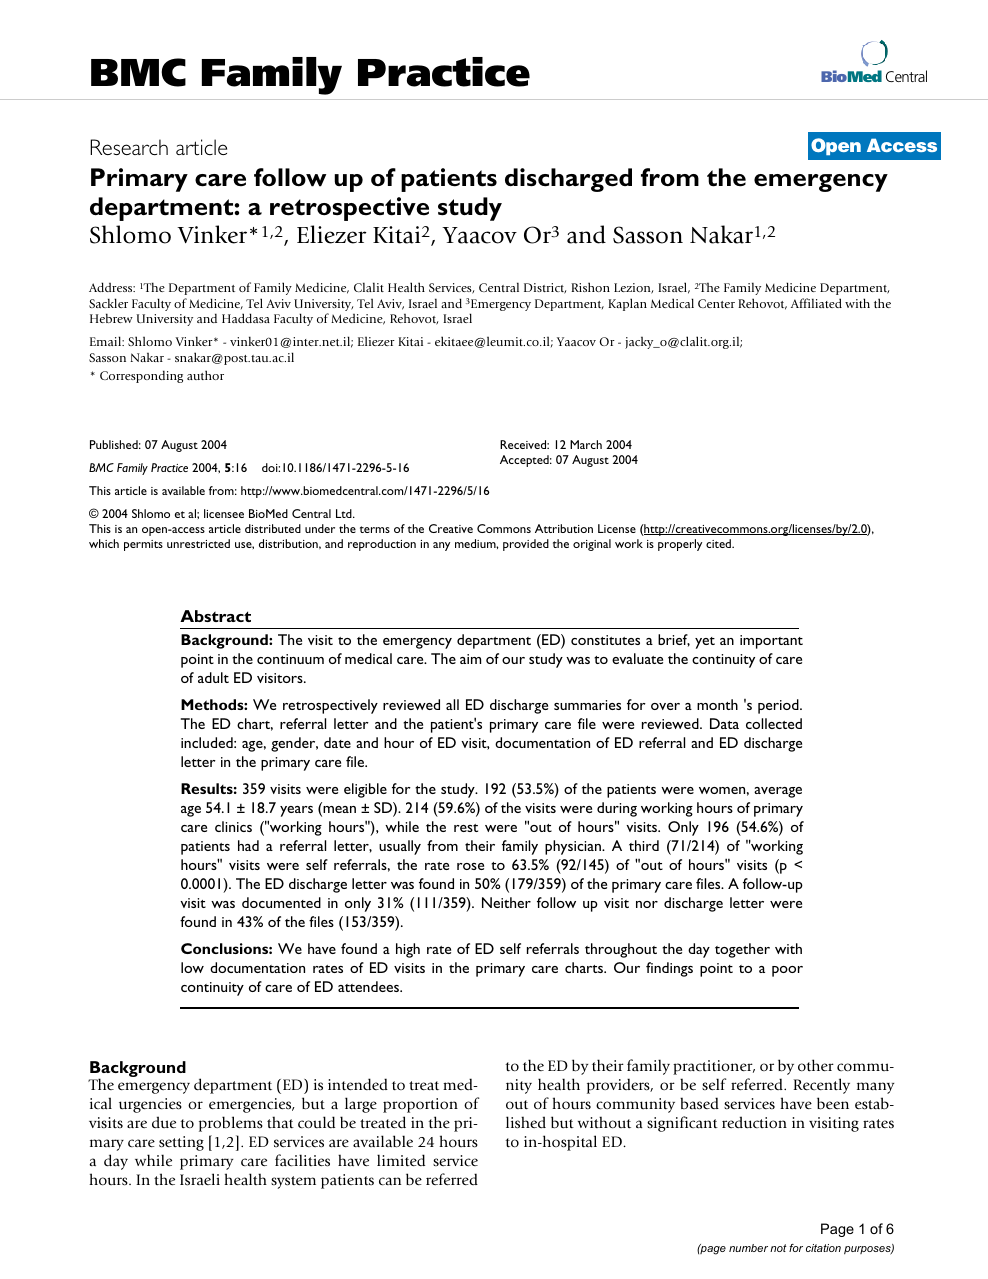 Primary Care Follow Up Of Patients Discharged From The Emergency Department A Retrospective Study Topic Of Research Paper In Clinical Medicine Download Scholarly Article Pdf And Read For Free On Cyberleninka